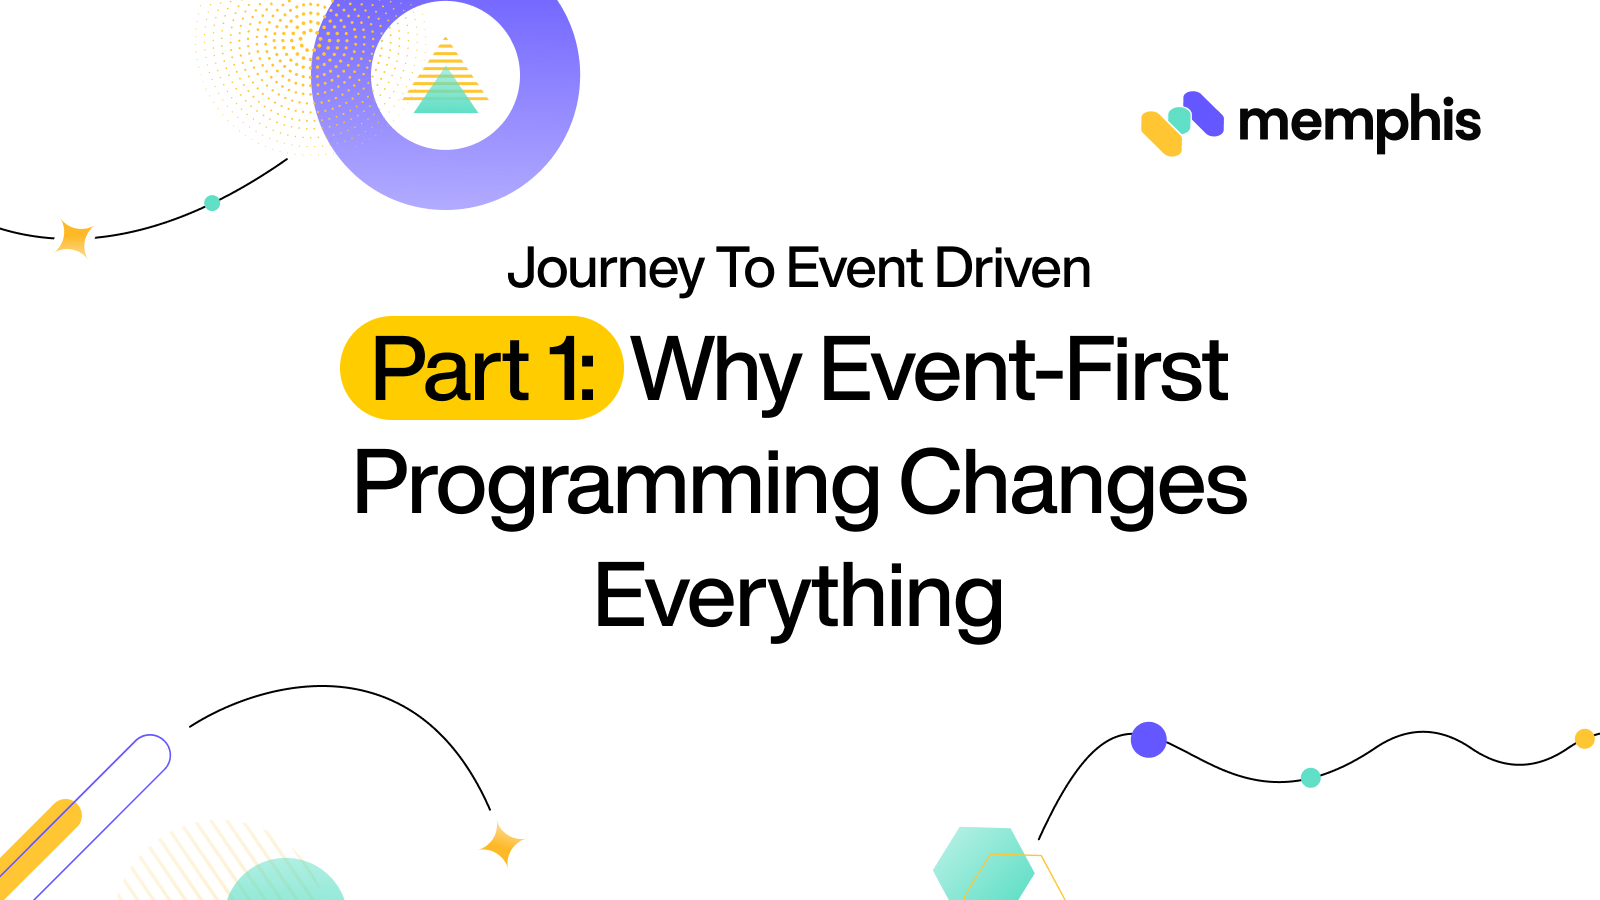 Journey to Event Driven – Part 1: Why Event-First Programming Changes Everything